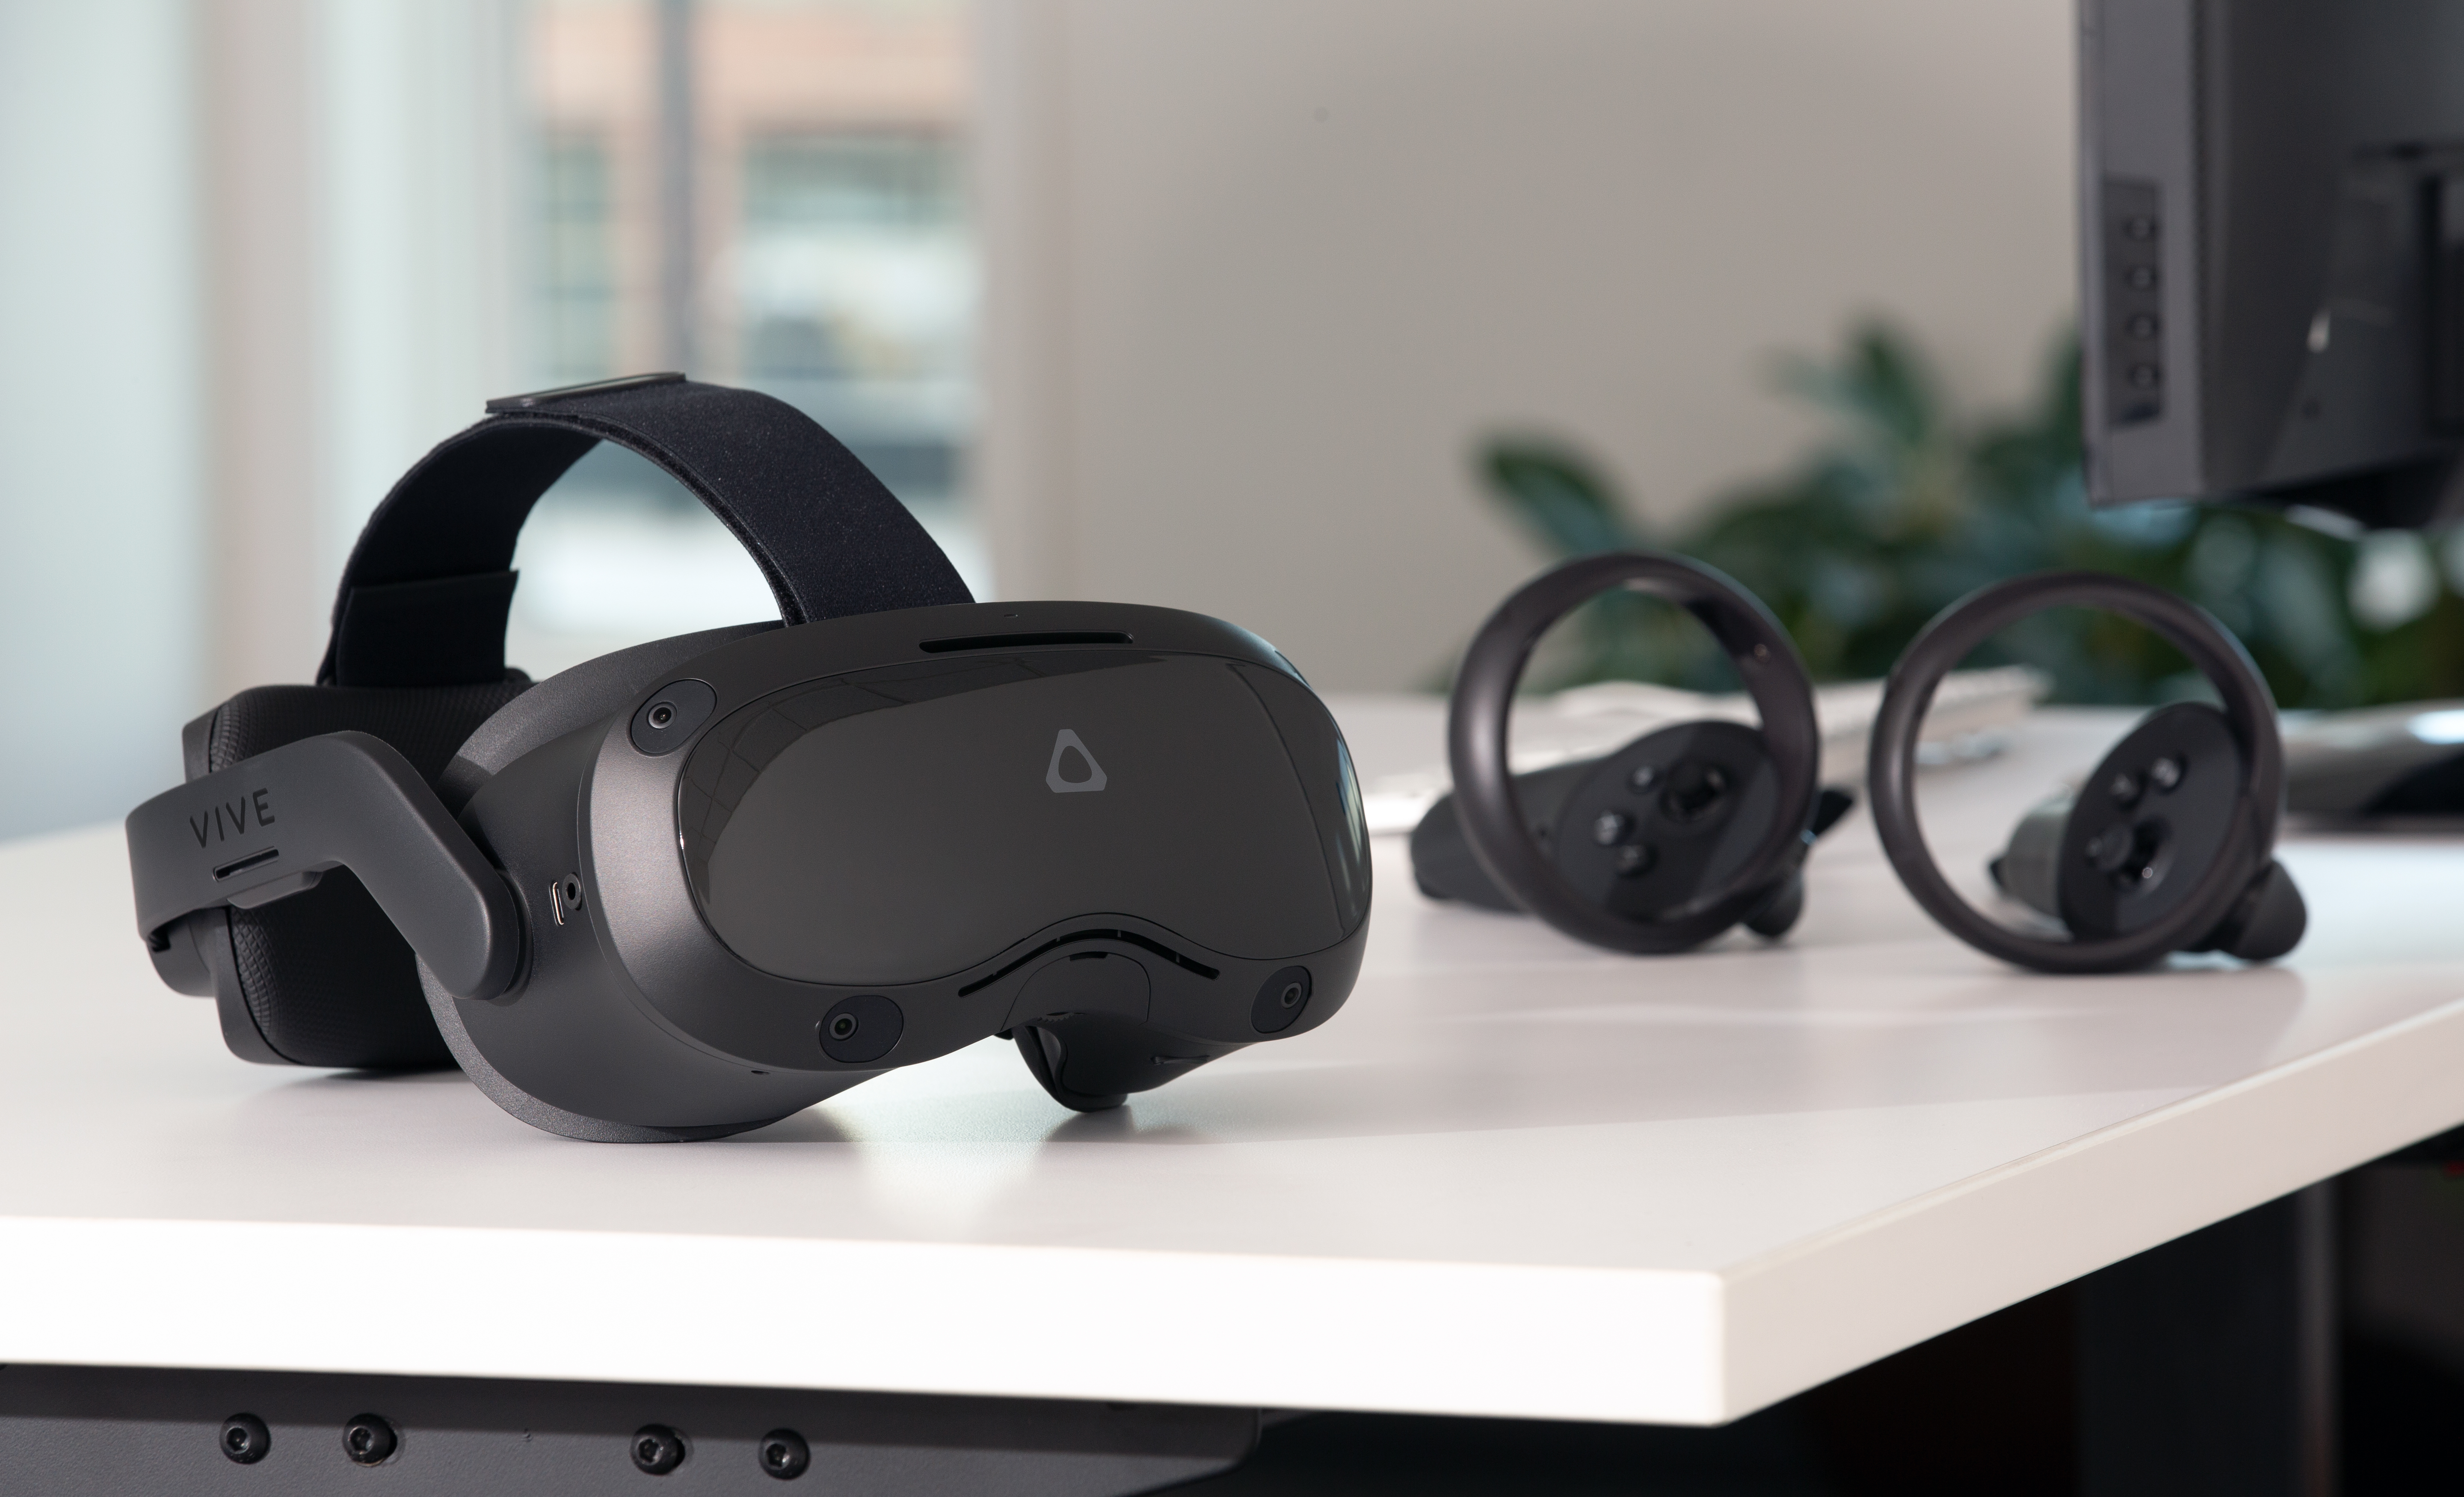 Upcoming HTC Vive Flow VR Headset Leaks Ahead of Launch